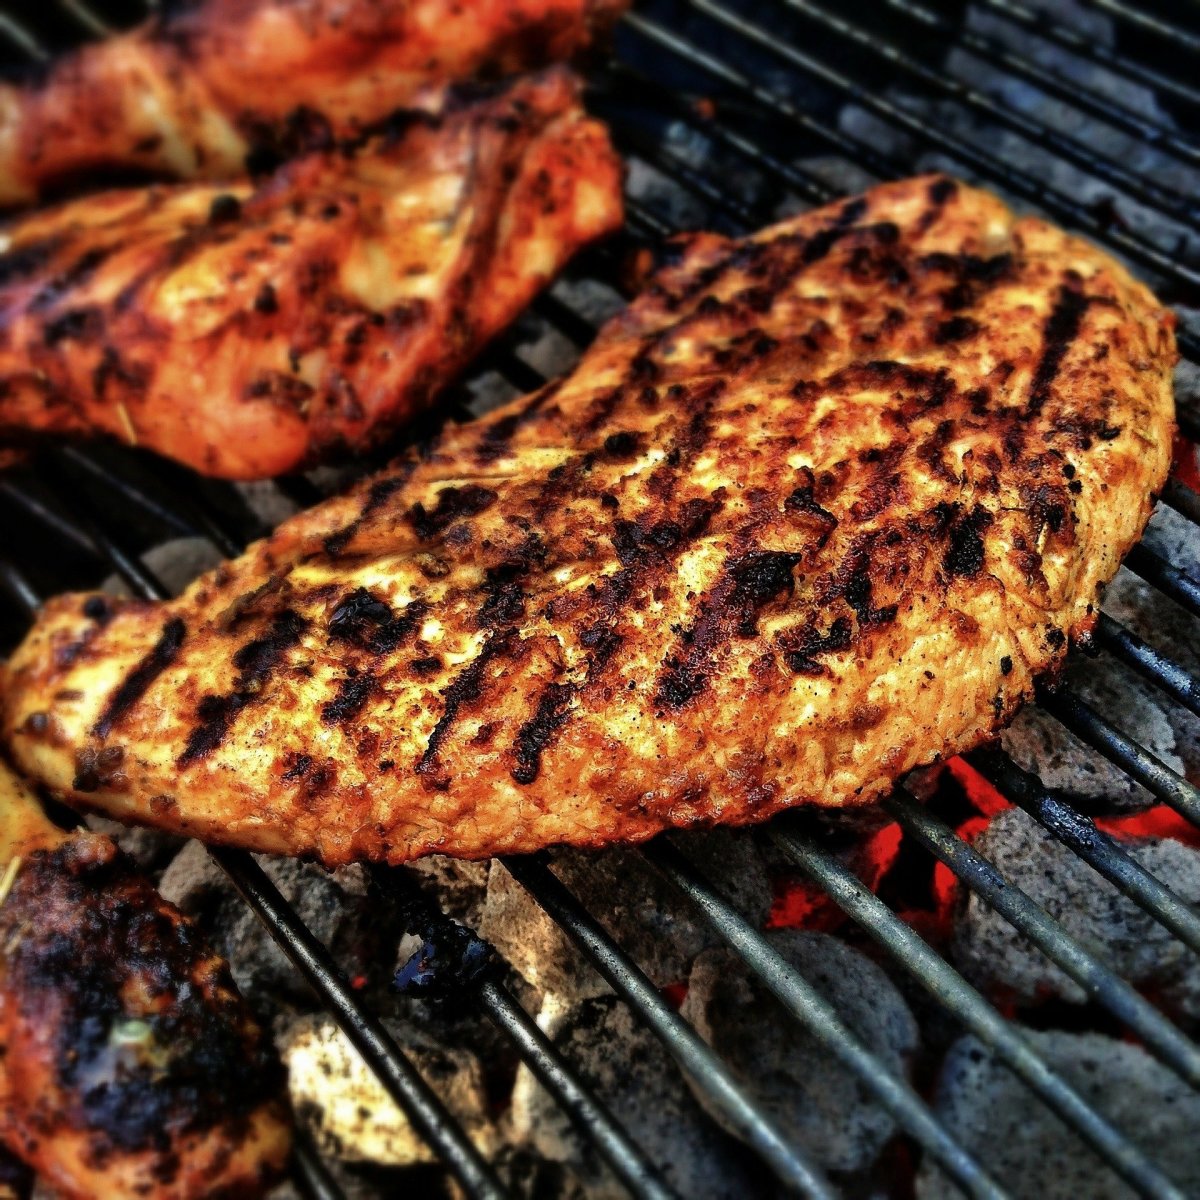 7 Pros of Grilling Food